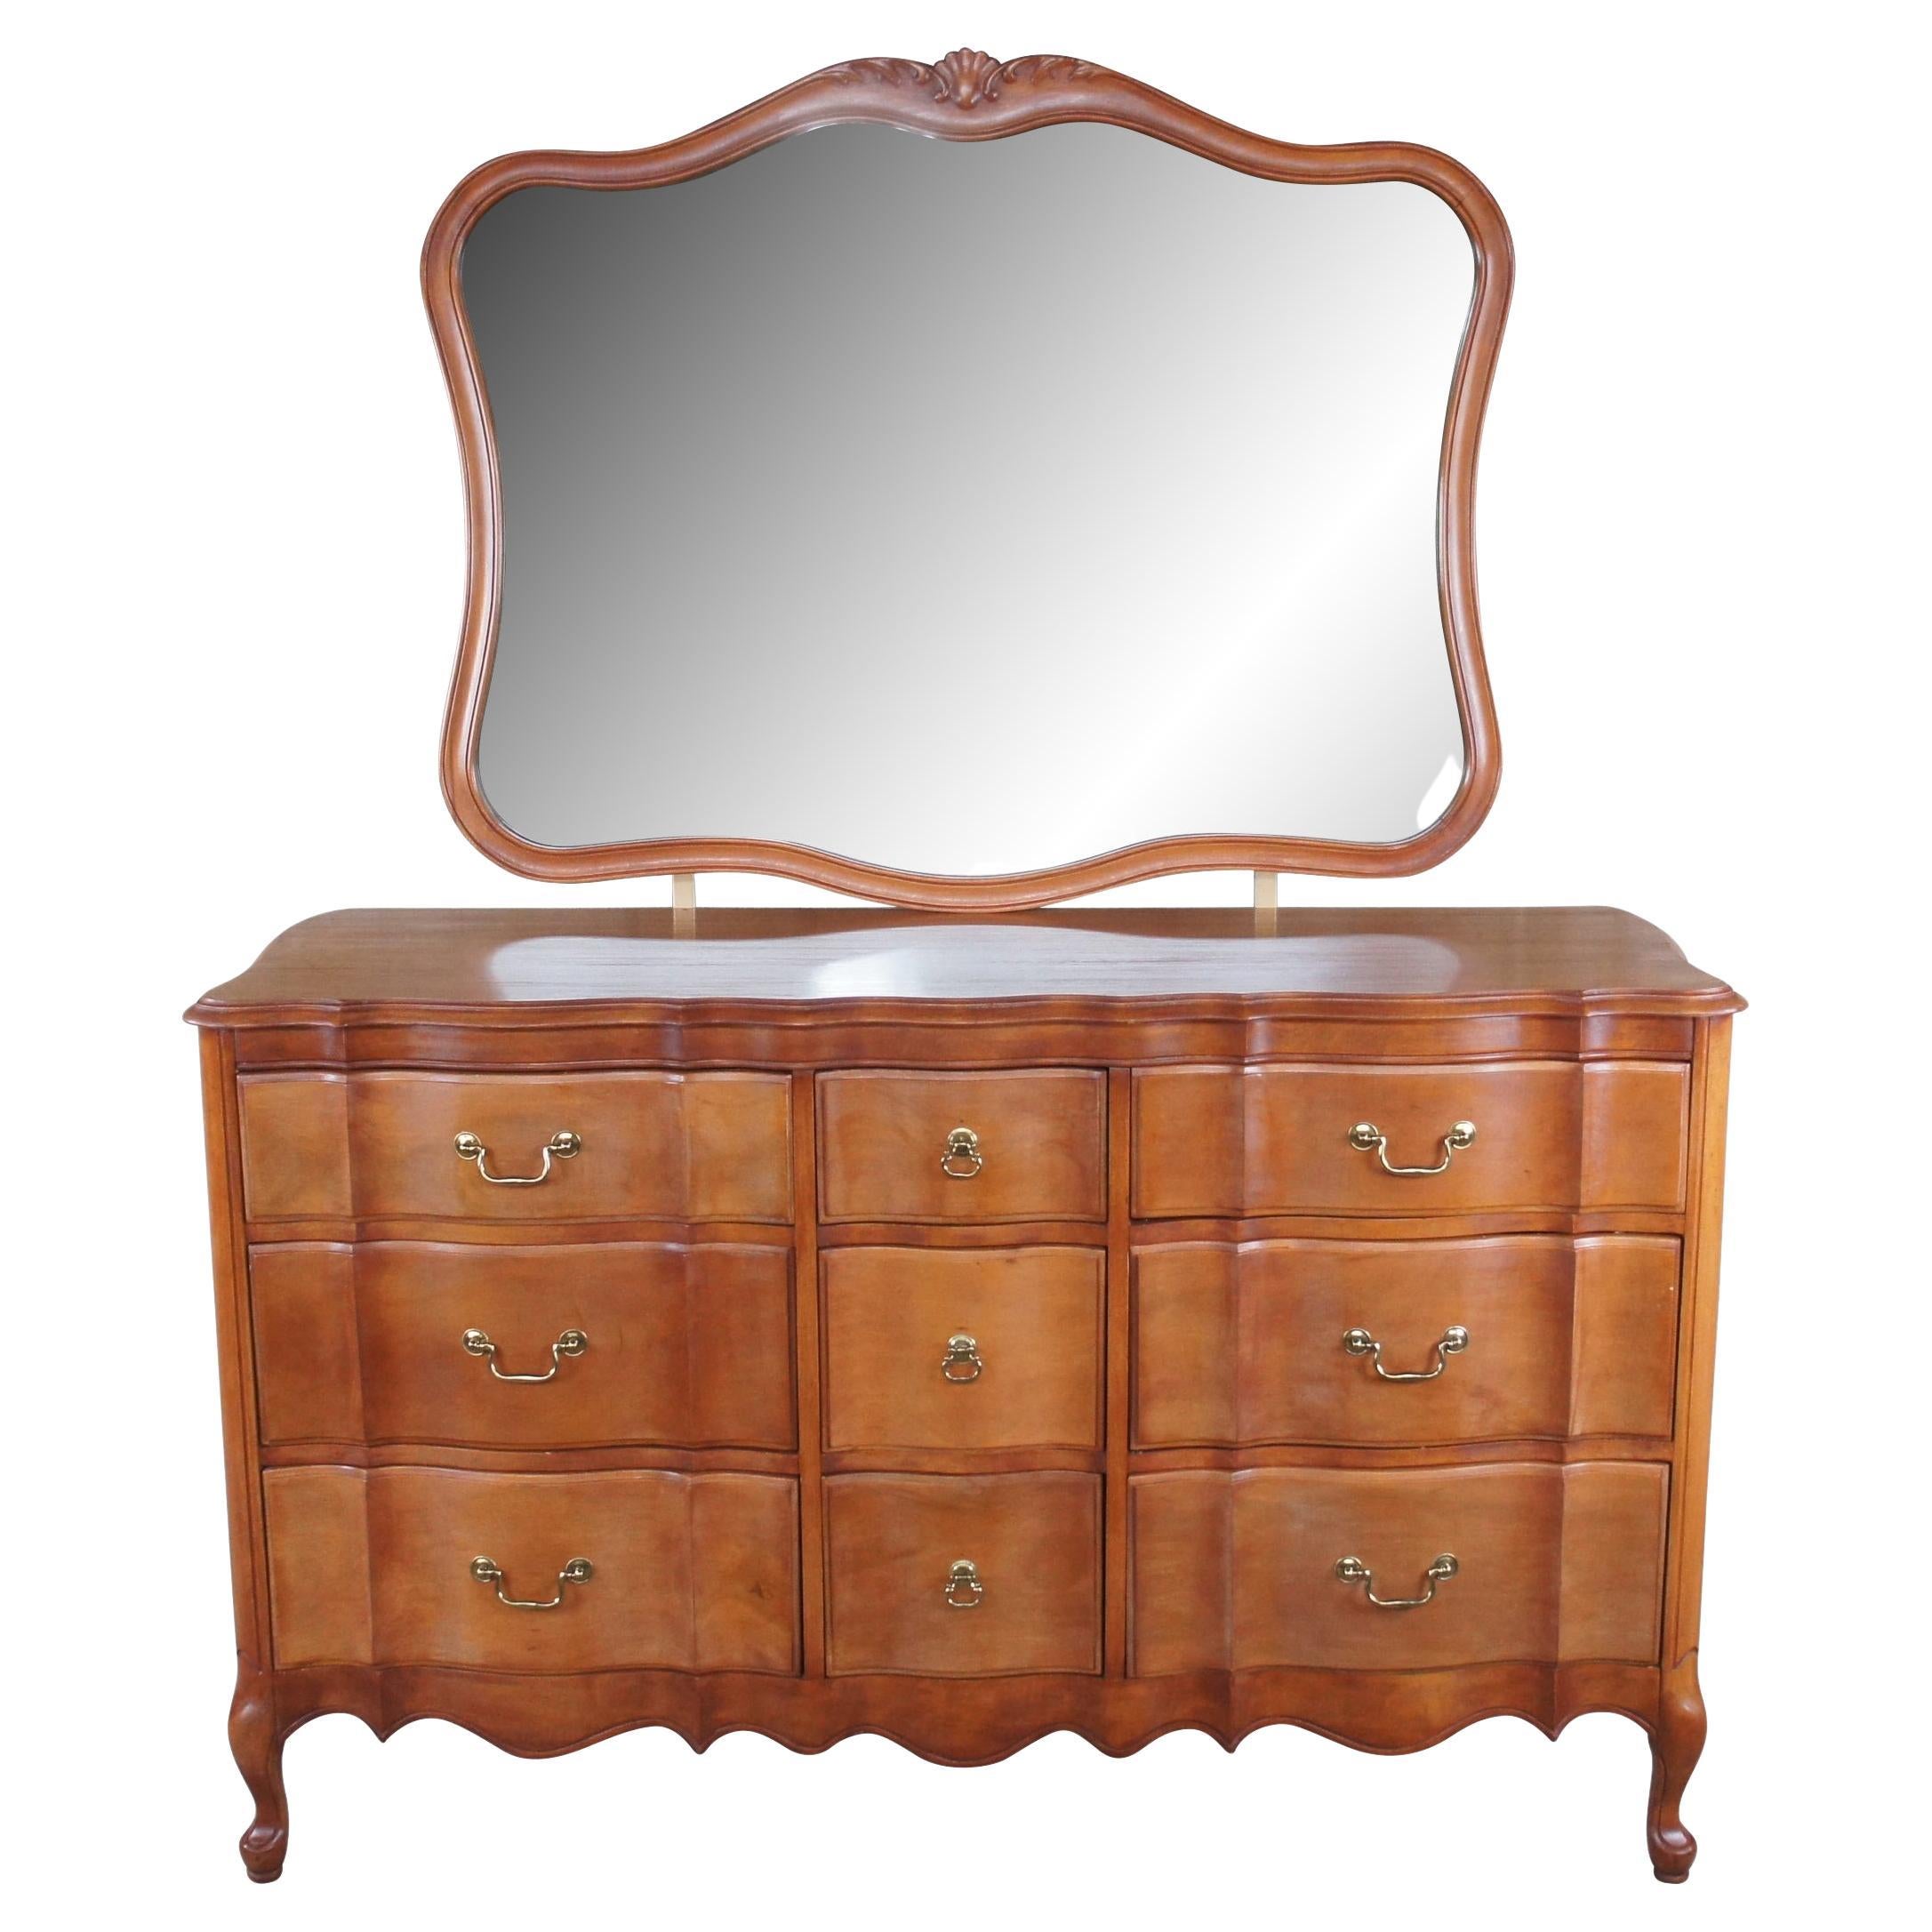 French Provincial Mahogany Serpentine Dresser Chest of Drawers w Vanity Mirror